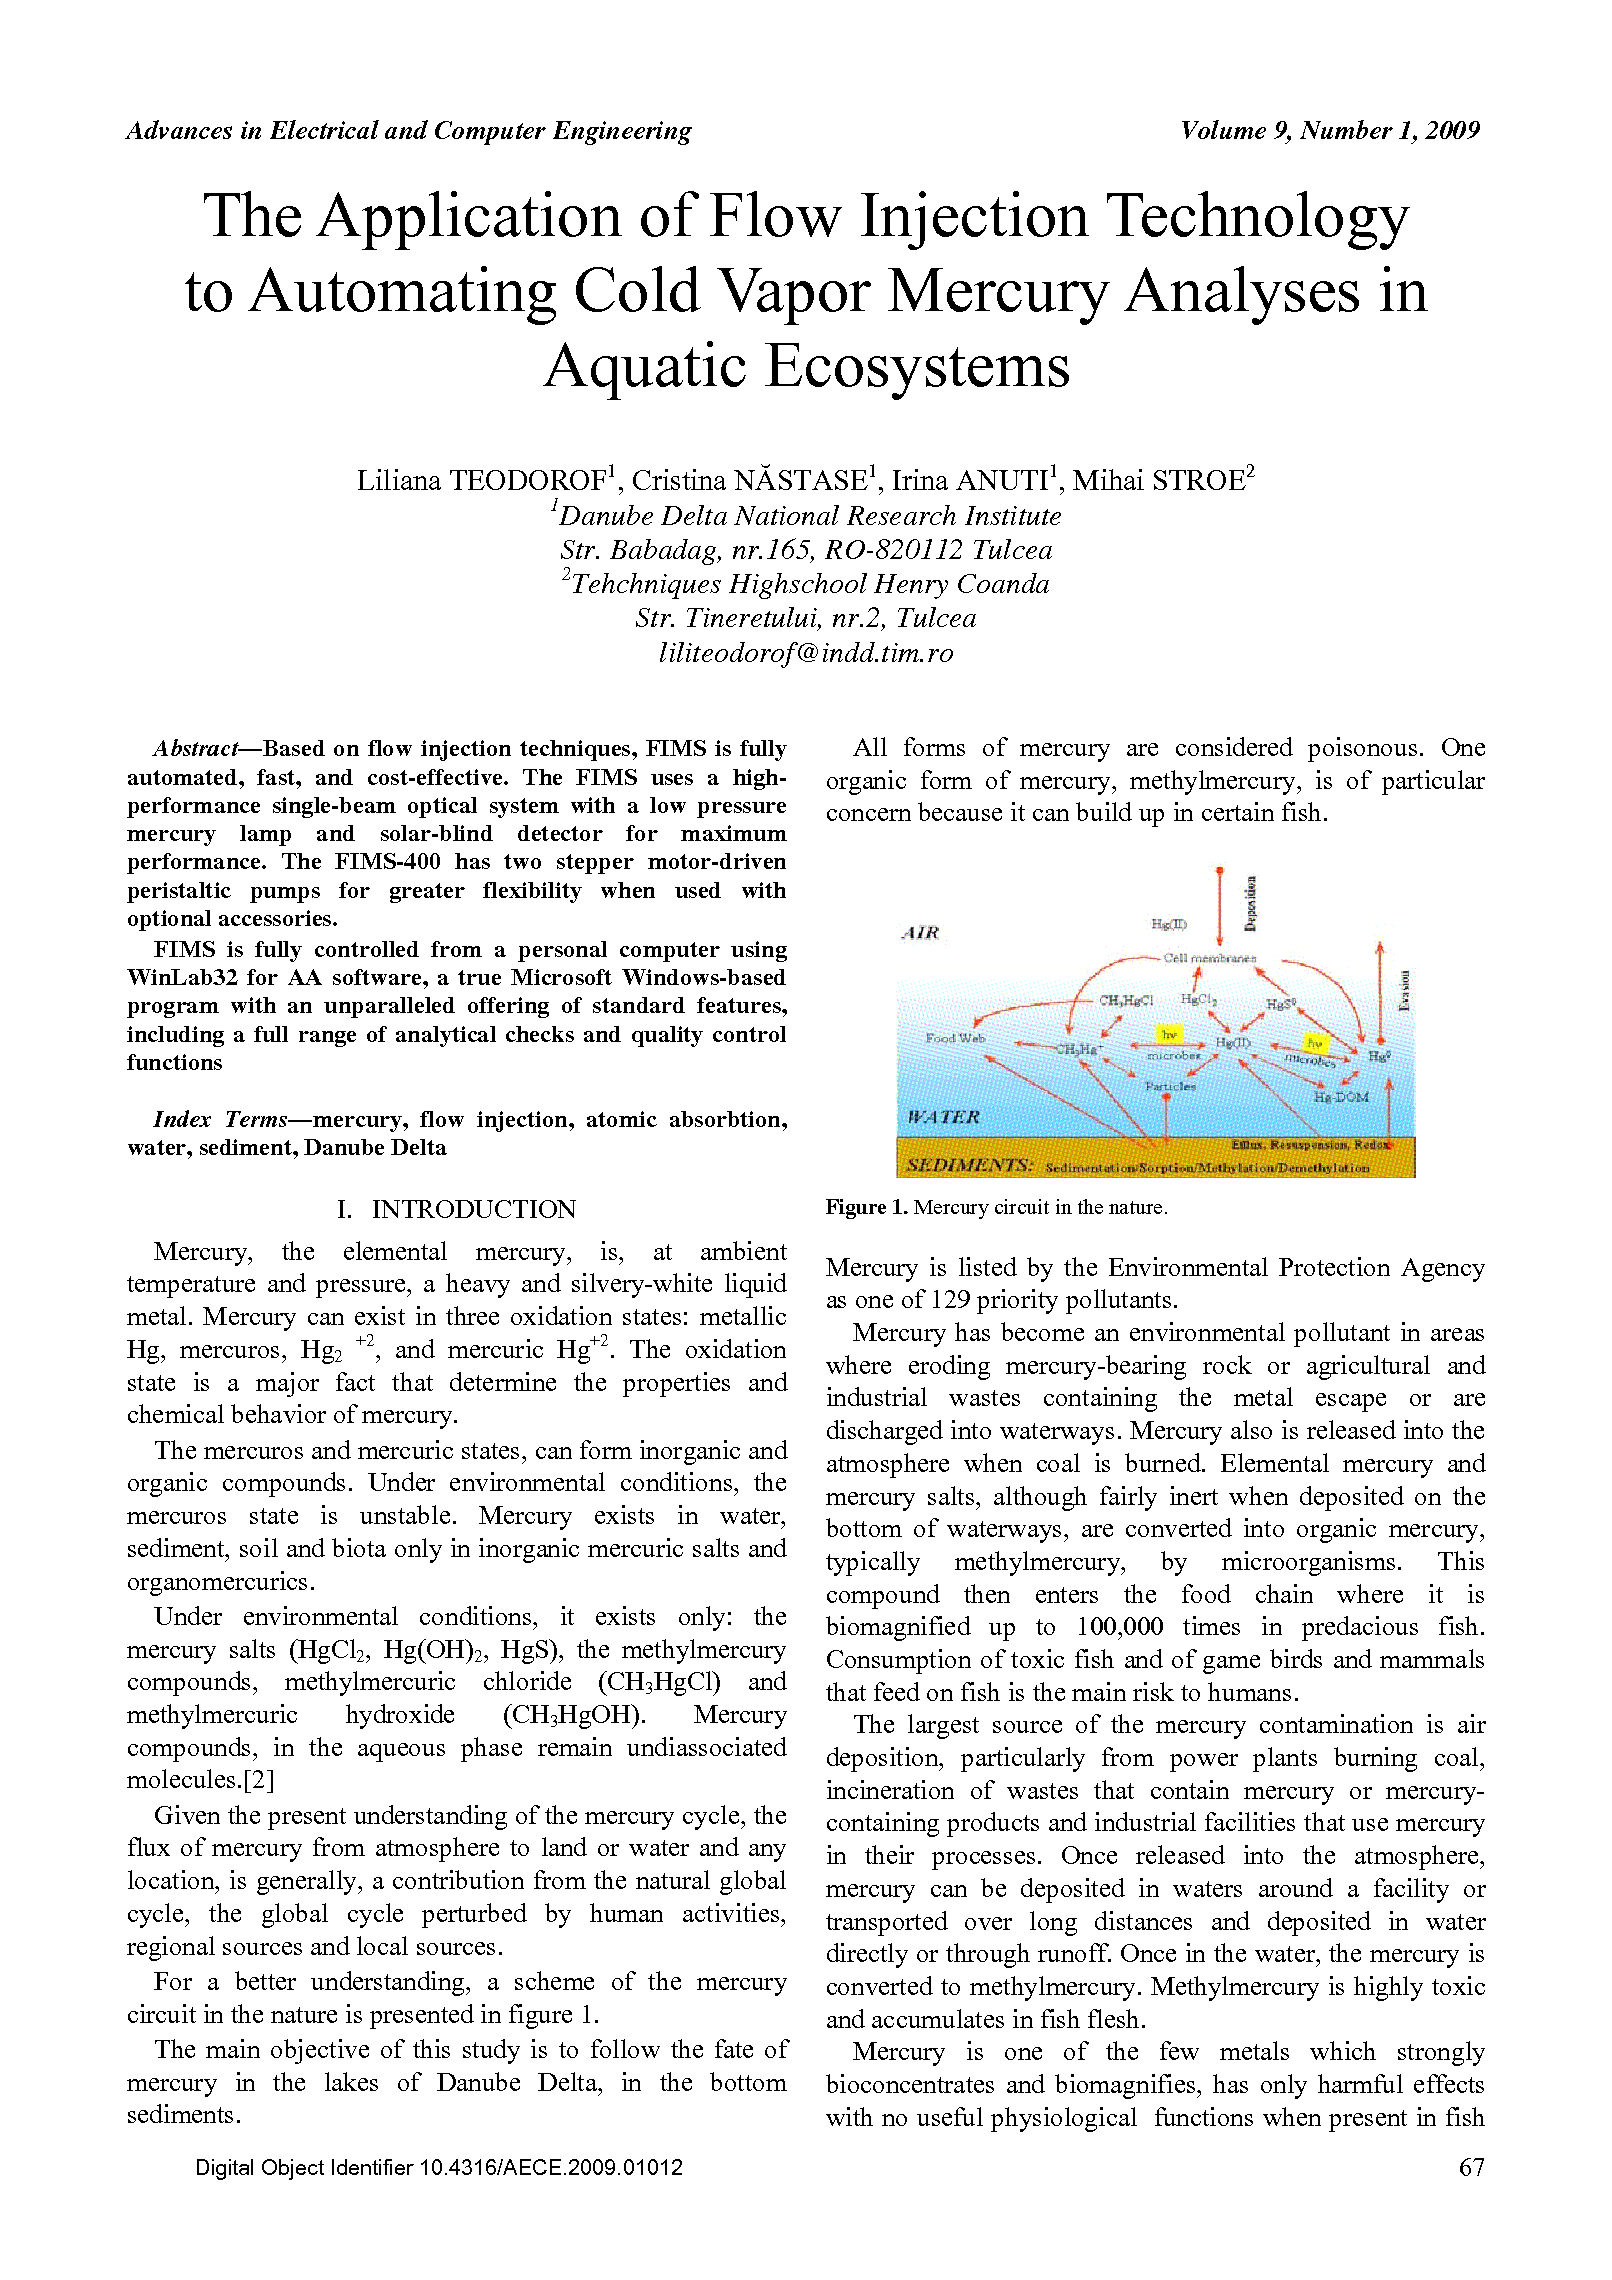 PDF Quickview for paper with DOI:10.4316/AECE.2009.01012